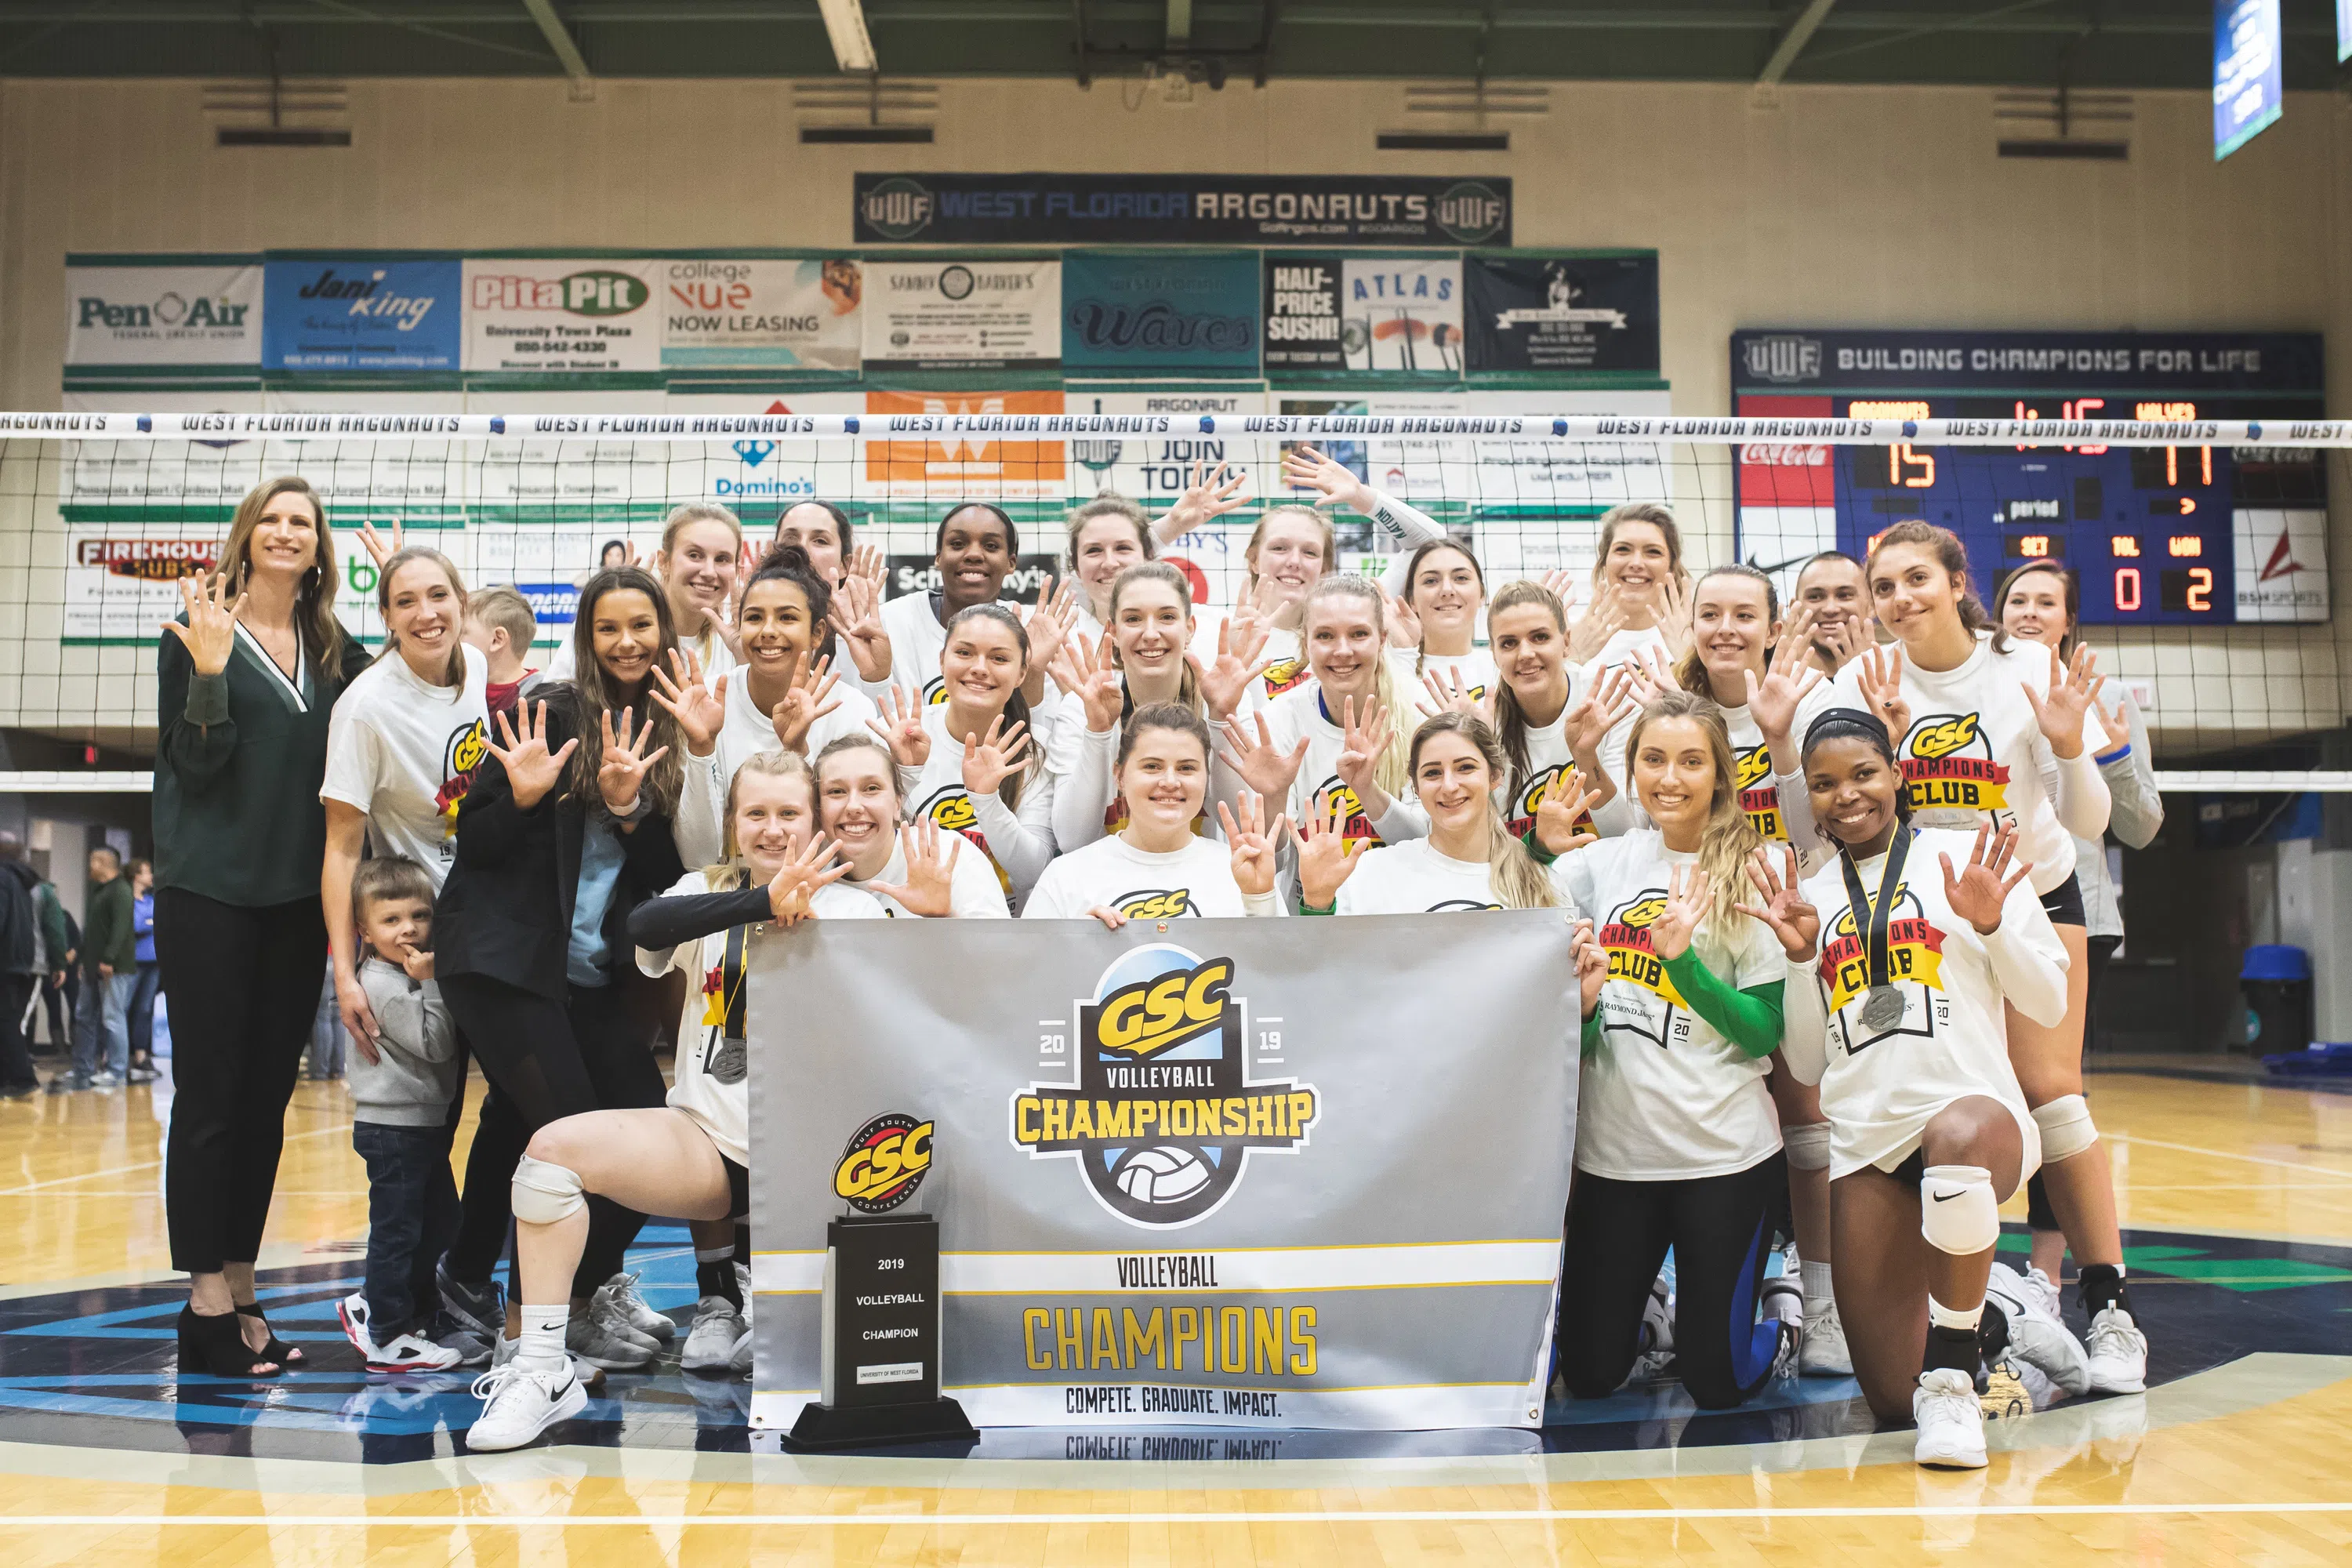 Women's volleyball team poses on the court with championship trophy